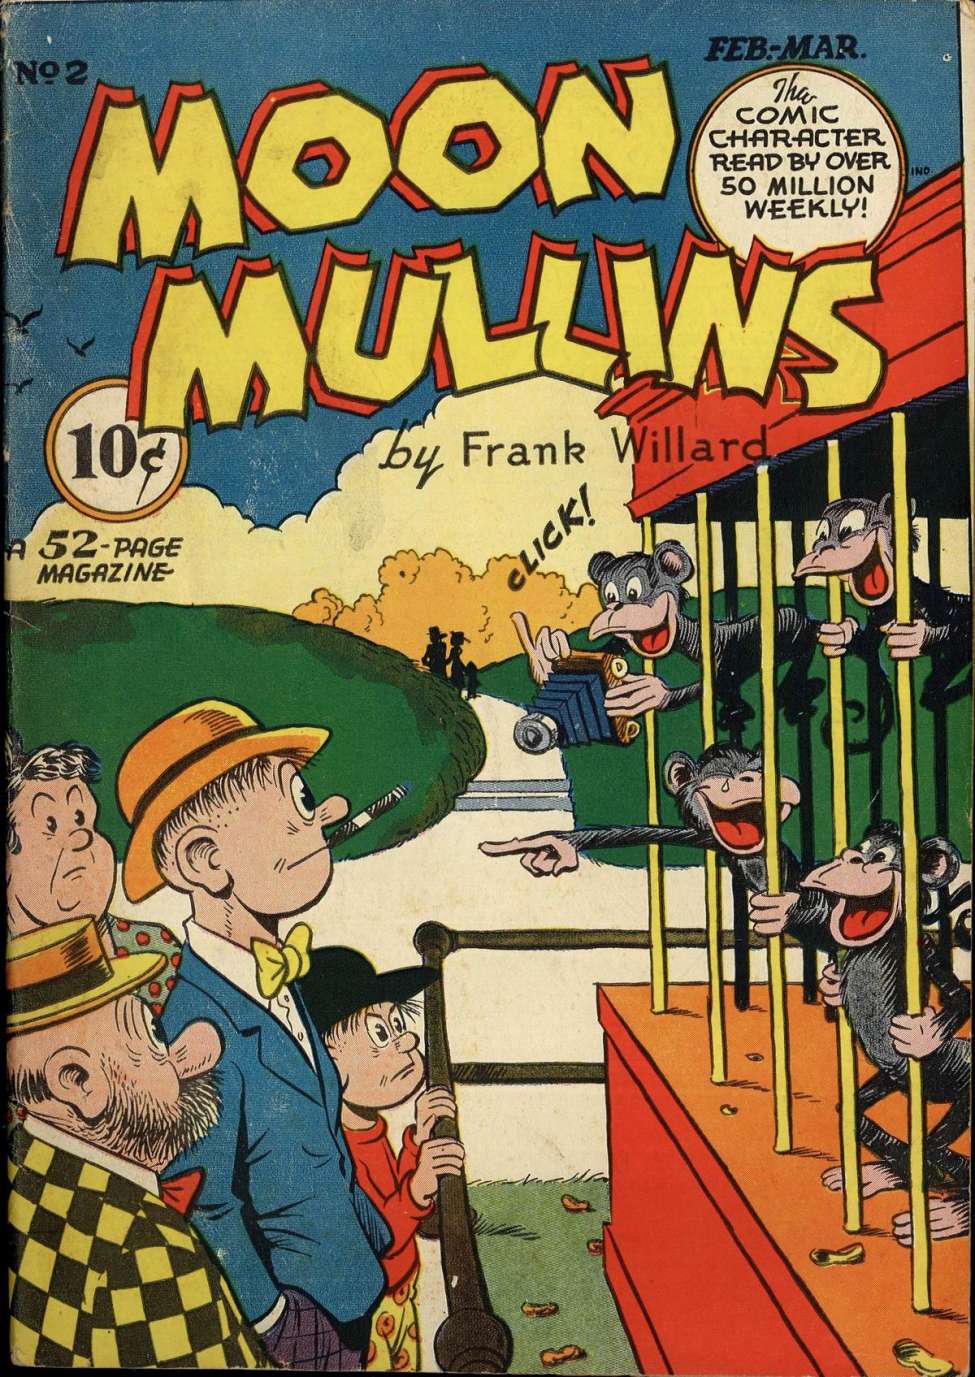 Book Cover For Moon Mullins 2